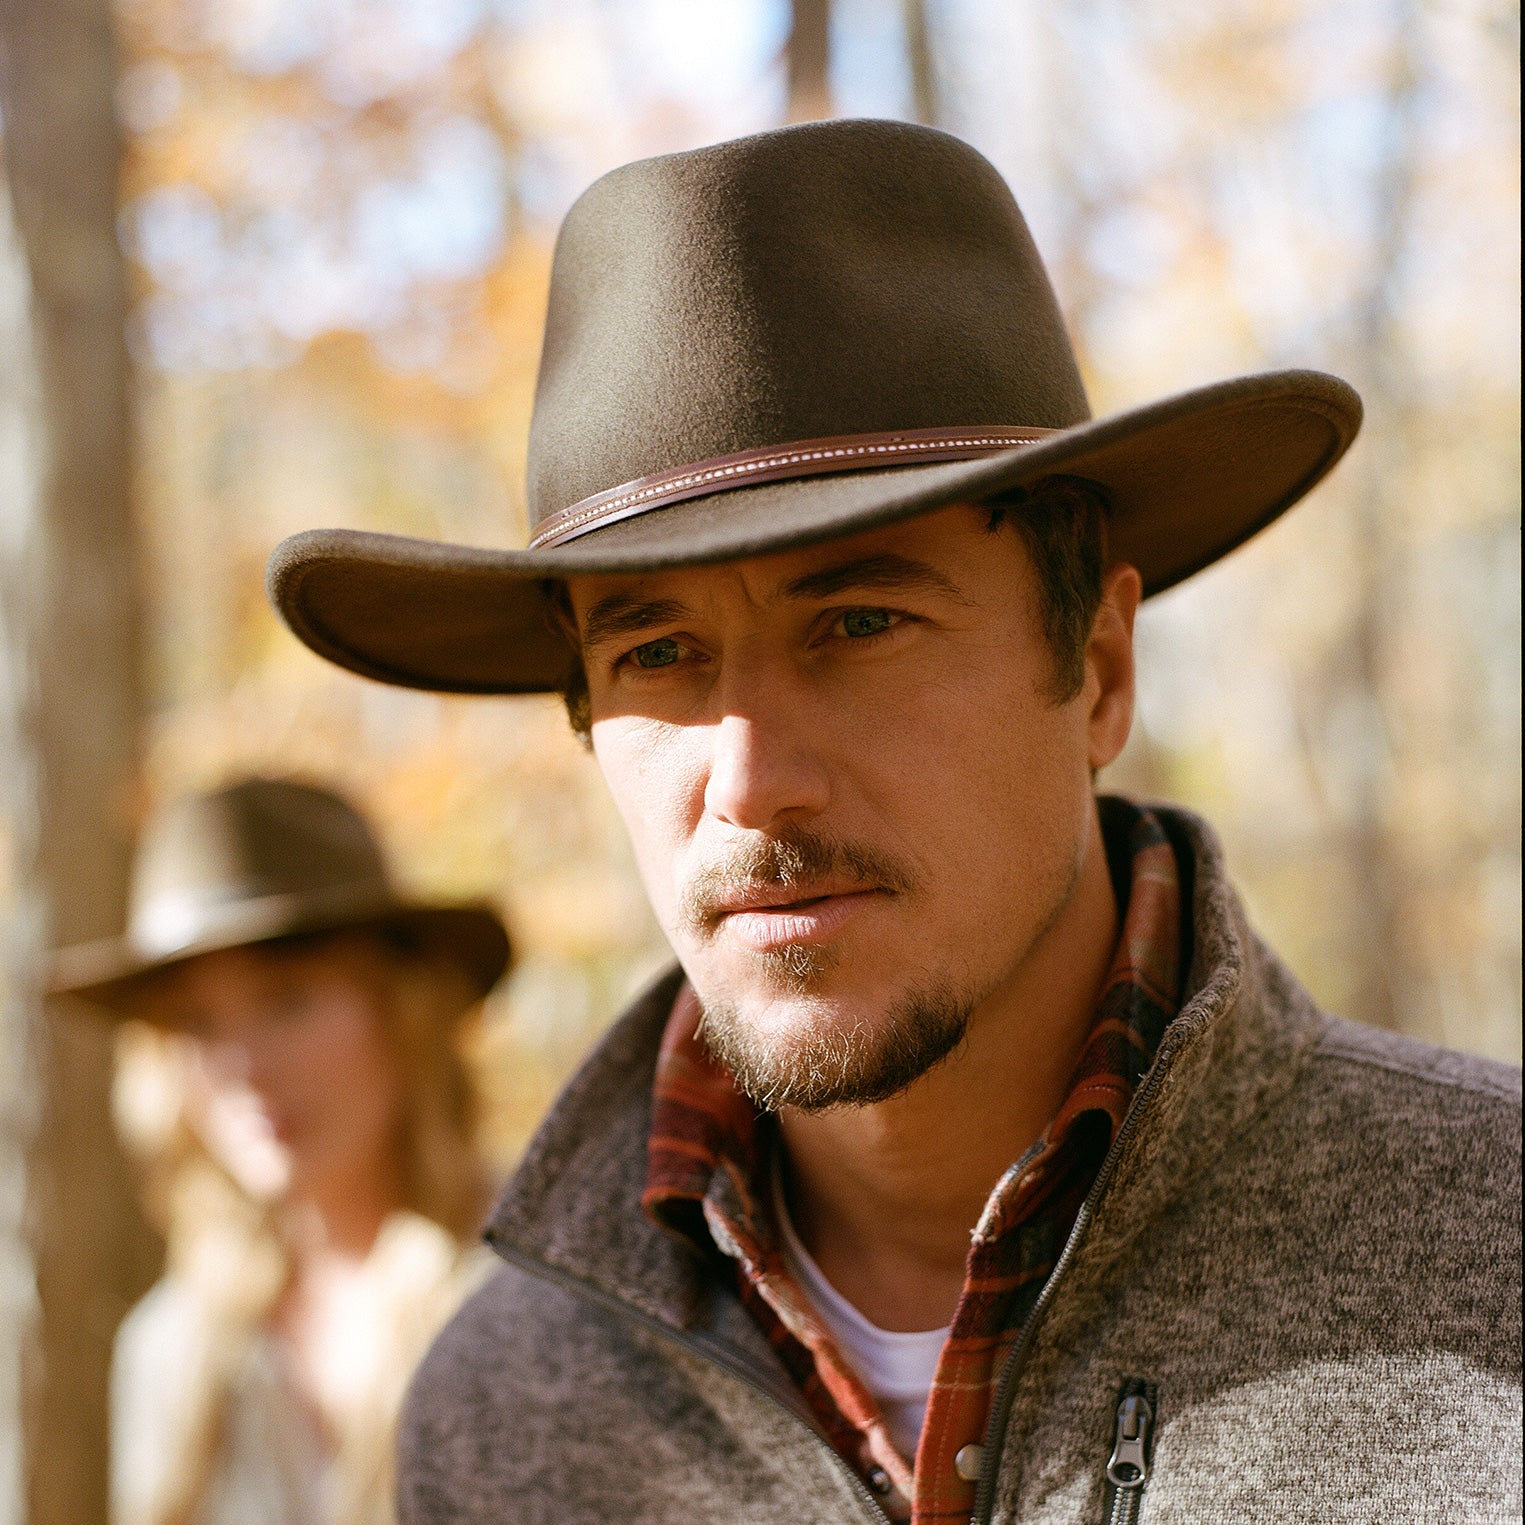  Stetson Crushable Wool Hat